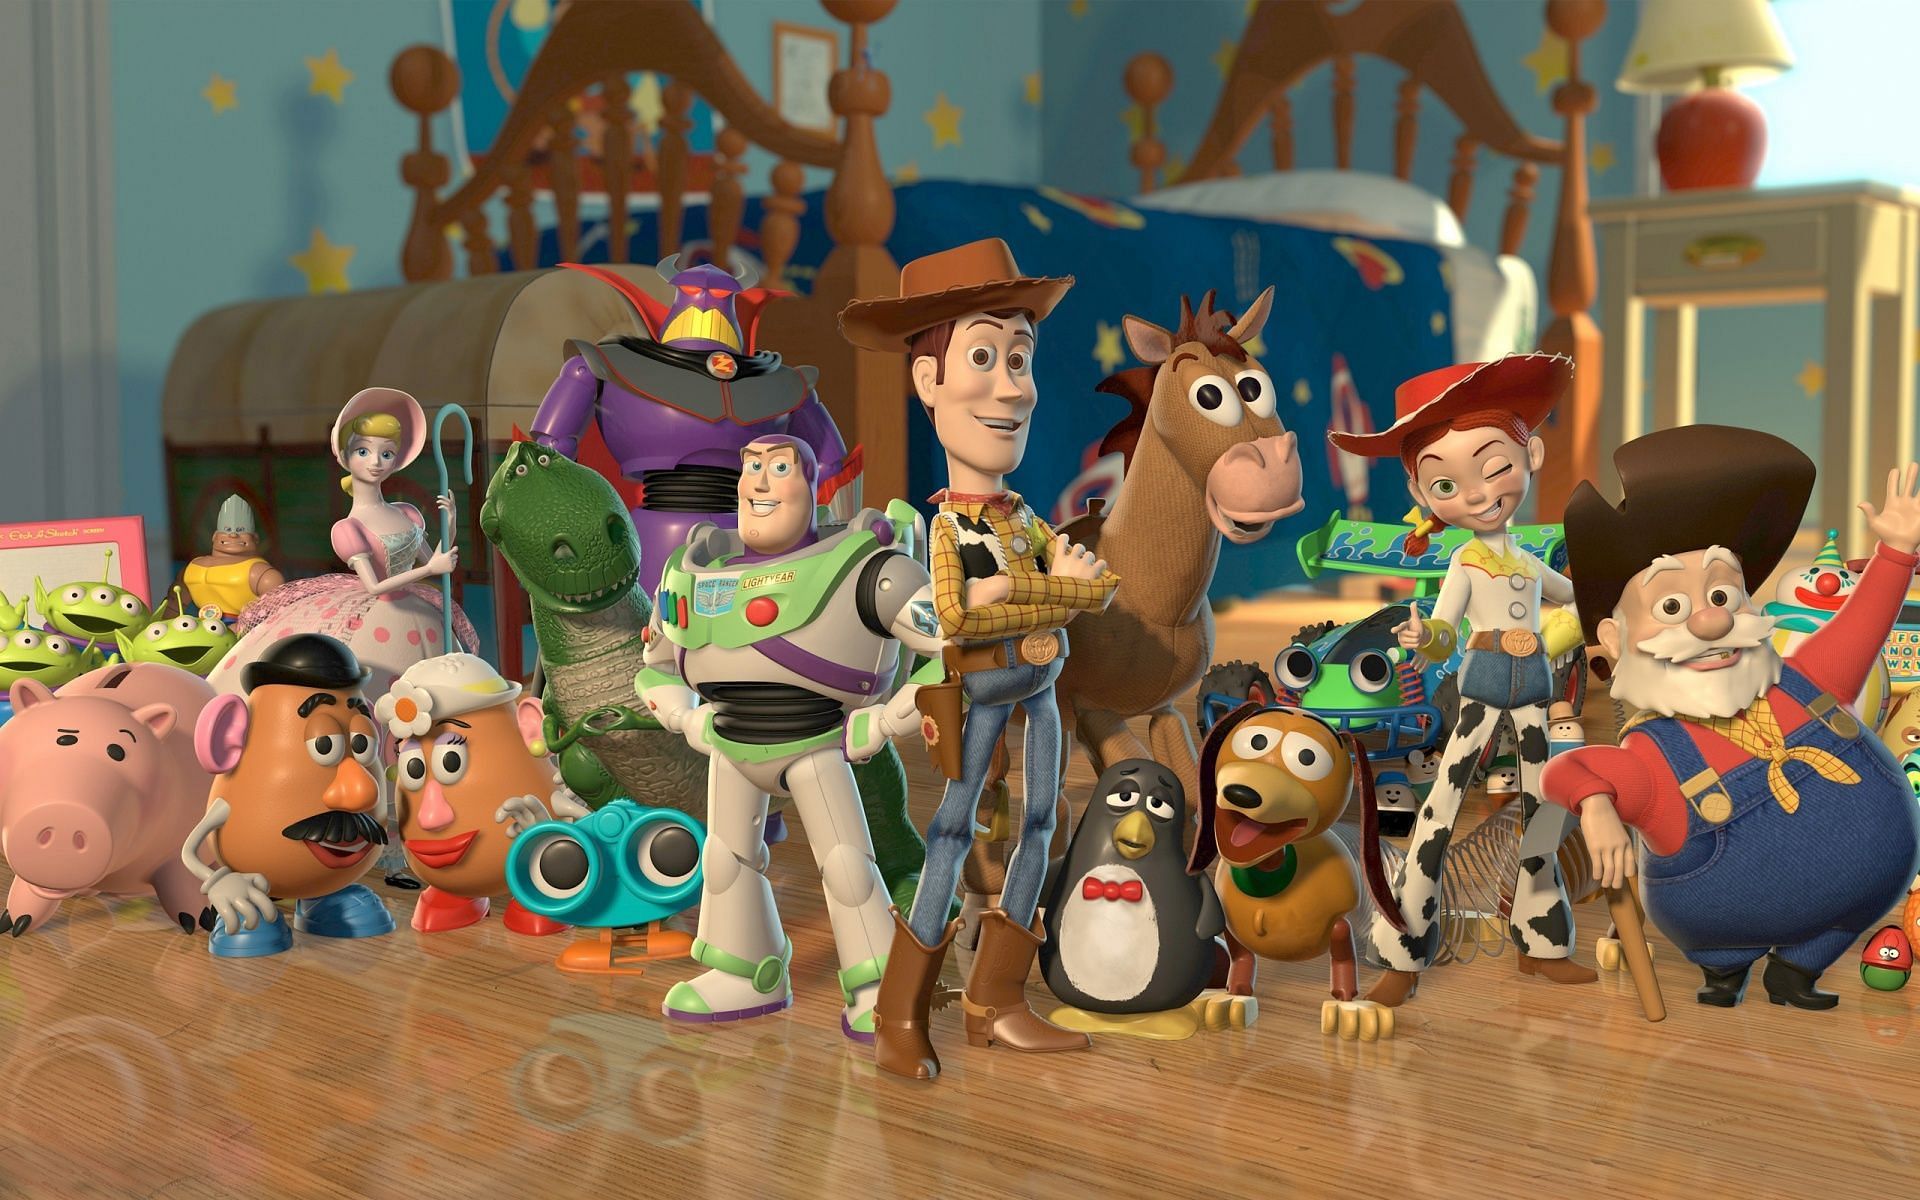 Toy Story was a grand project that required several months of creation (Image via Sportskeeda)